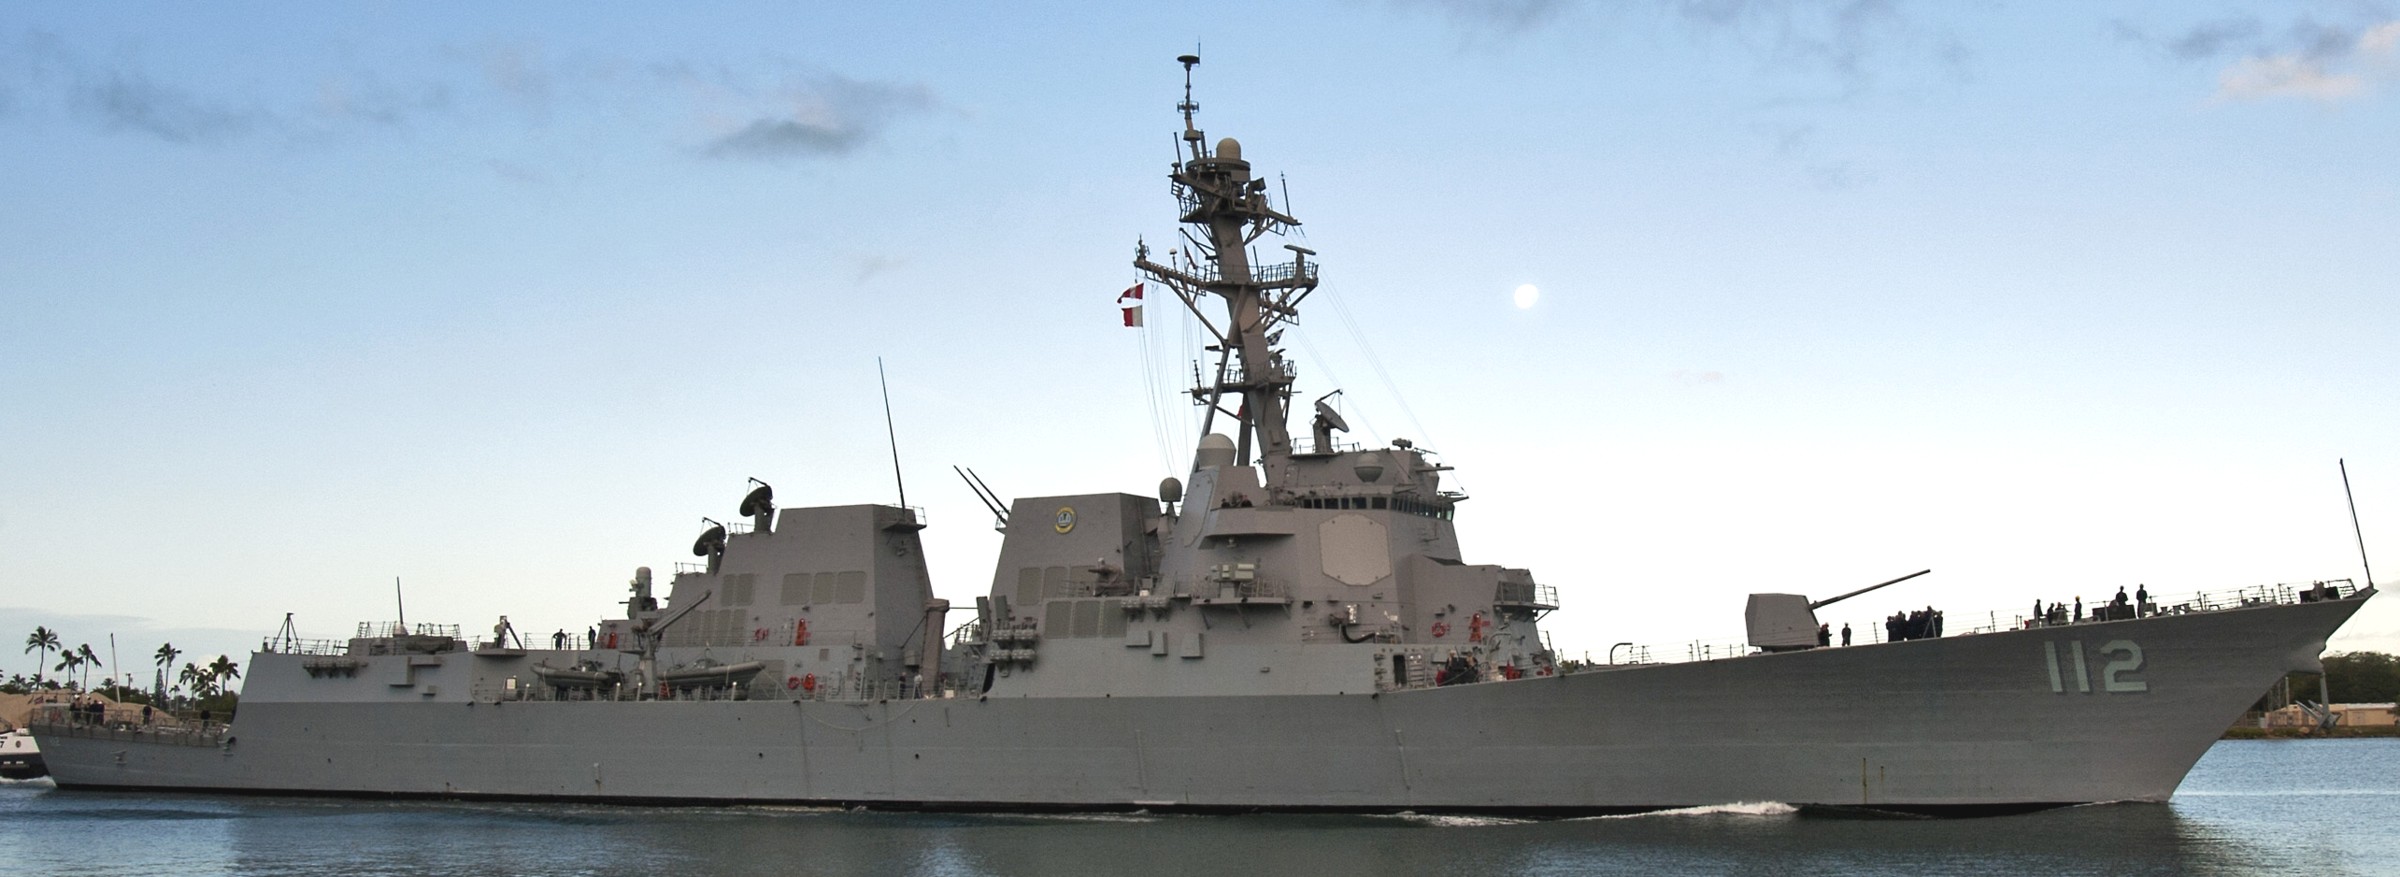 ddg-112 uss michael murphy arleigh burke class guided missile destroyer aegis us navy 15